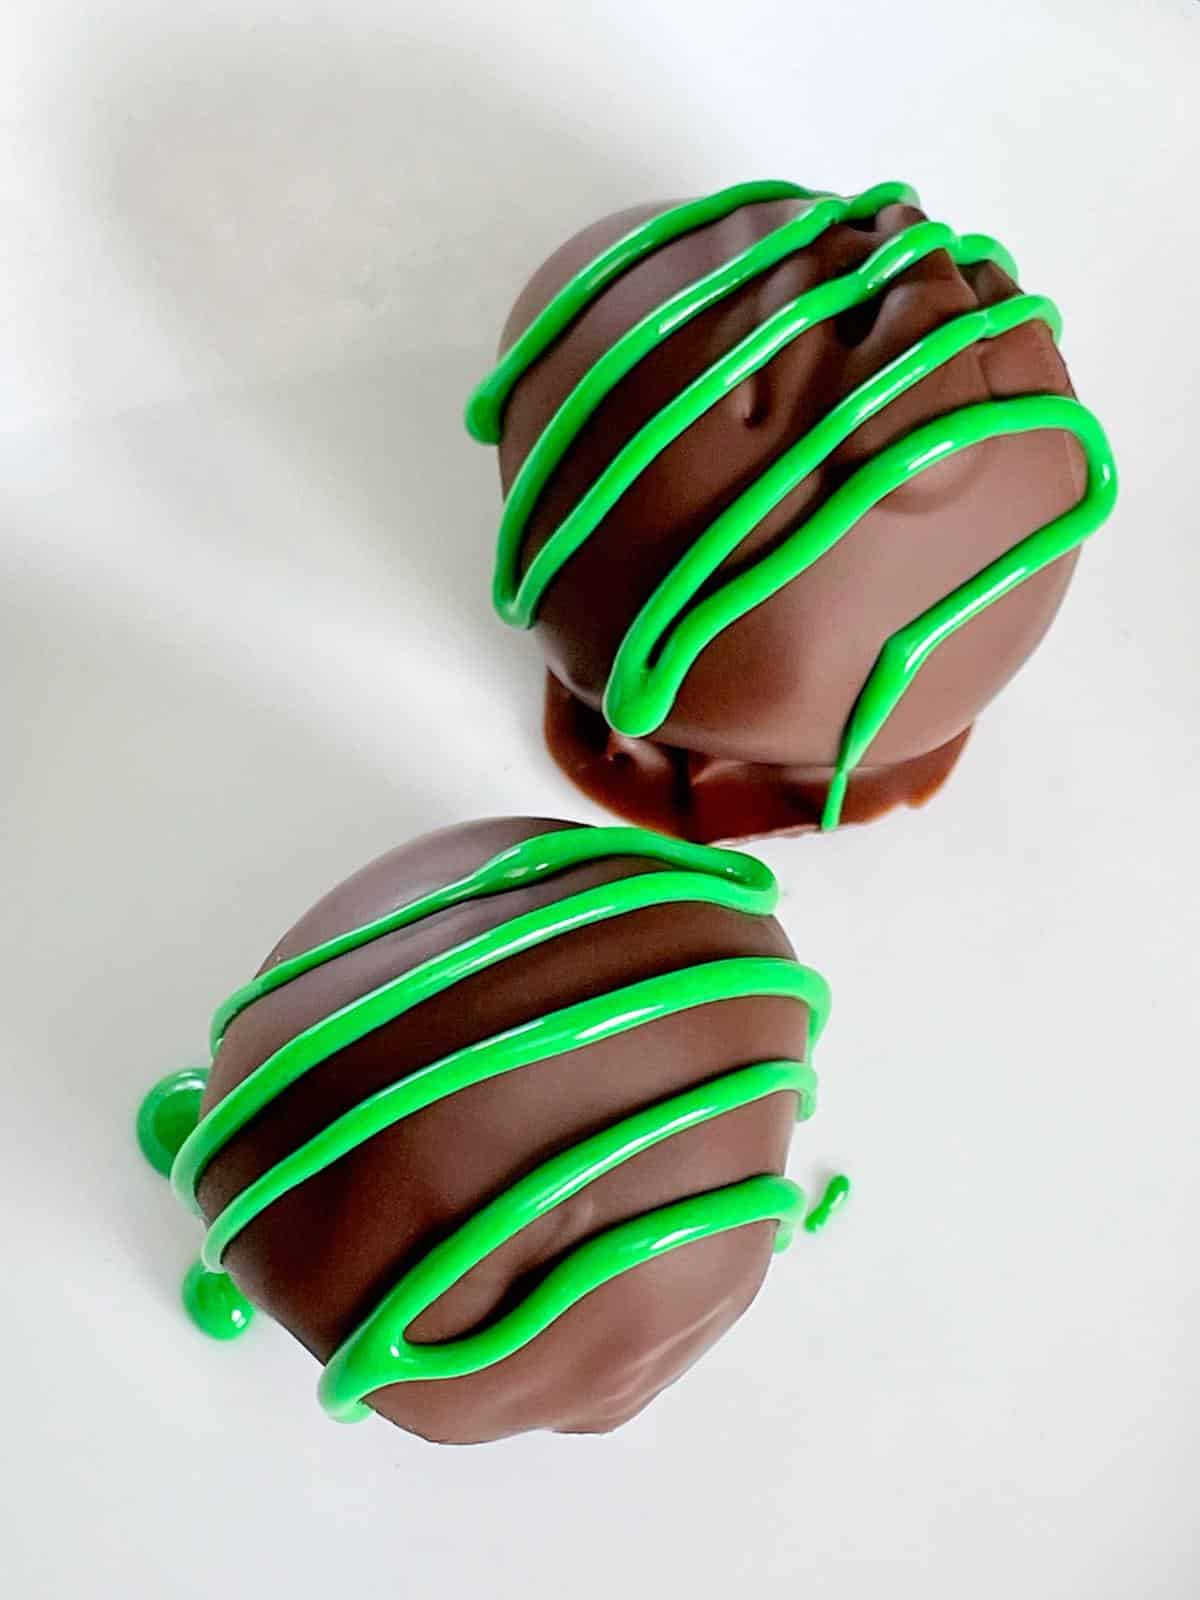 Thin mint truffles with green icing.